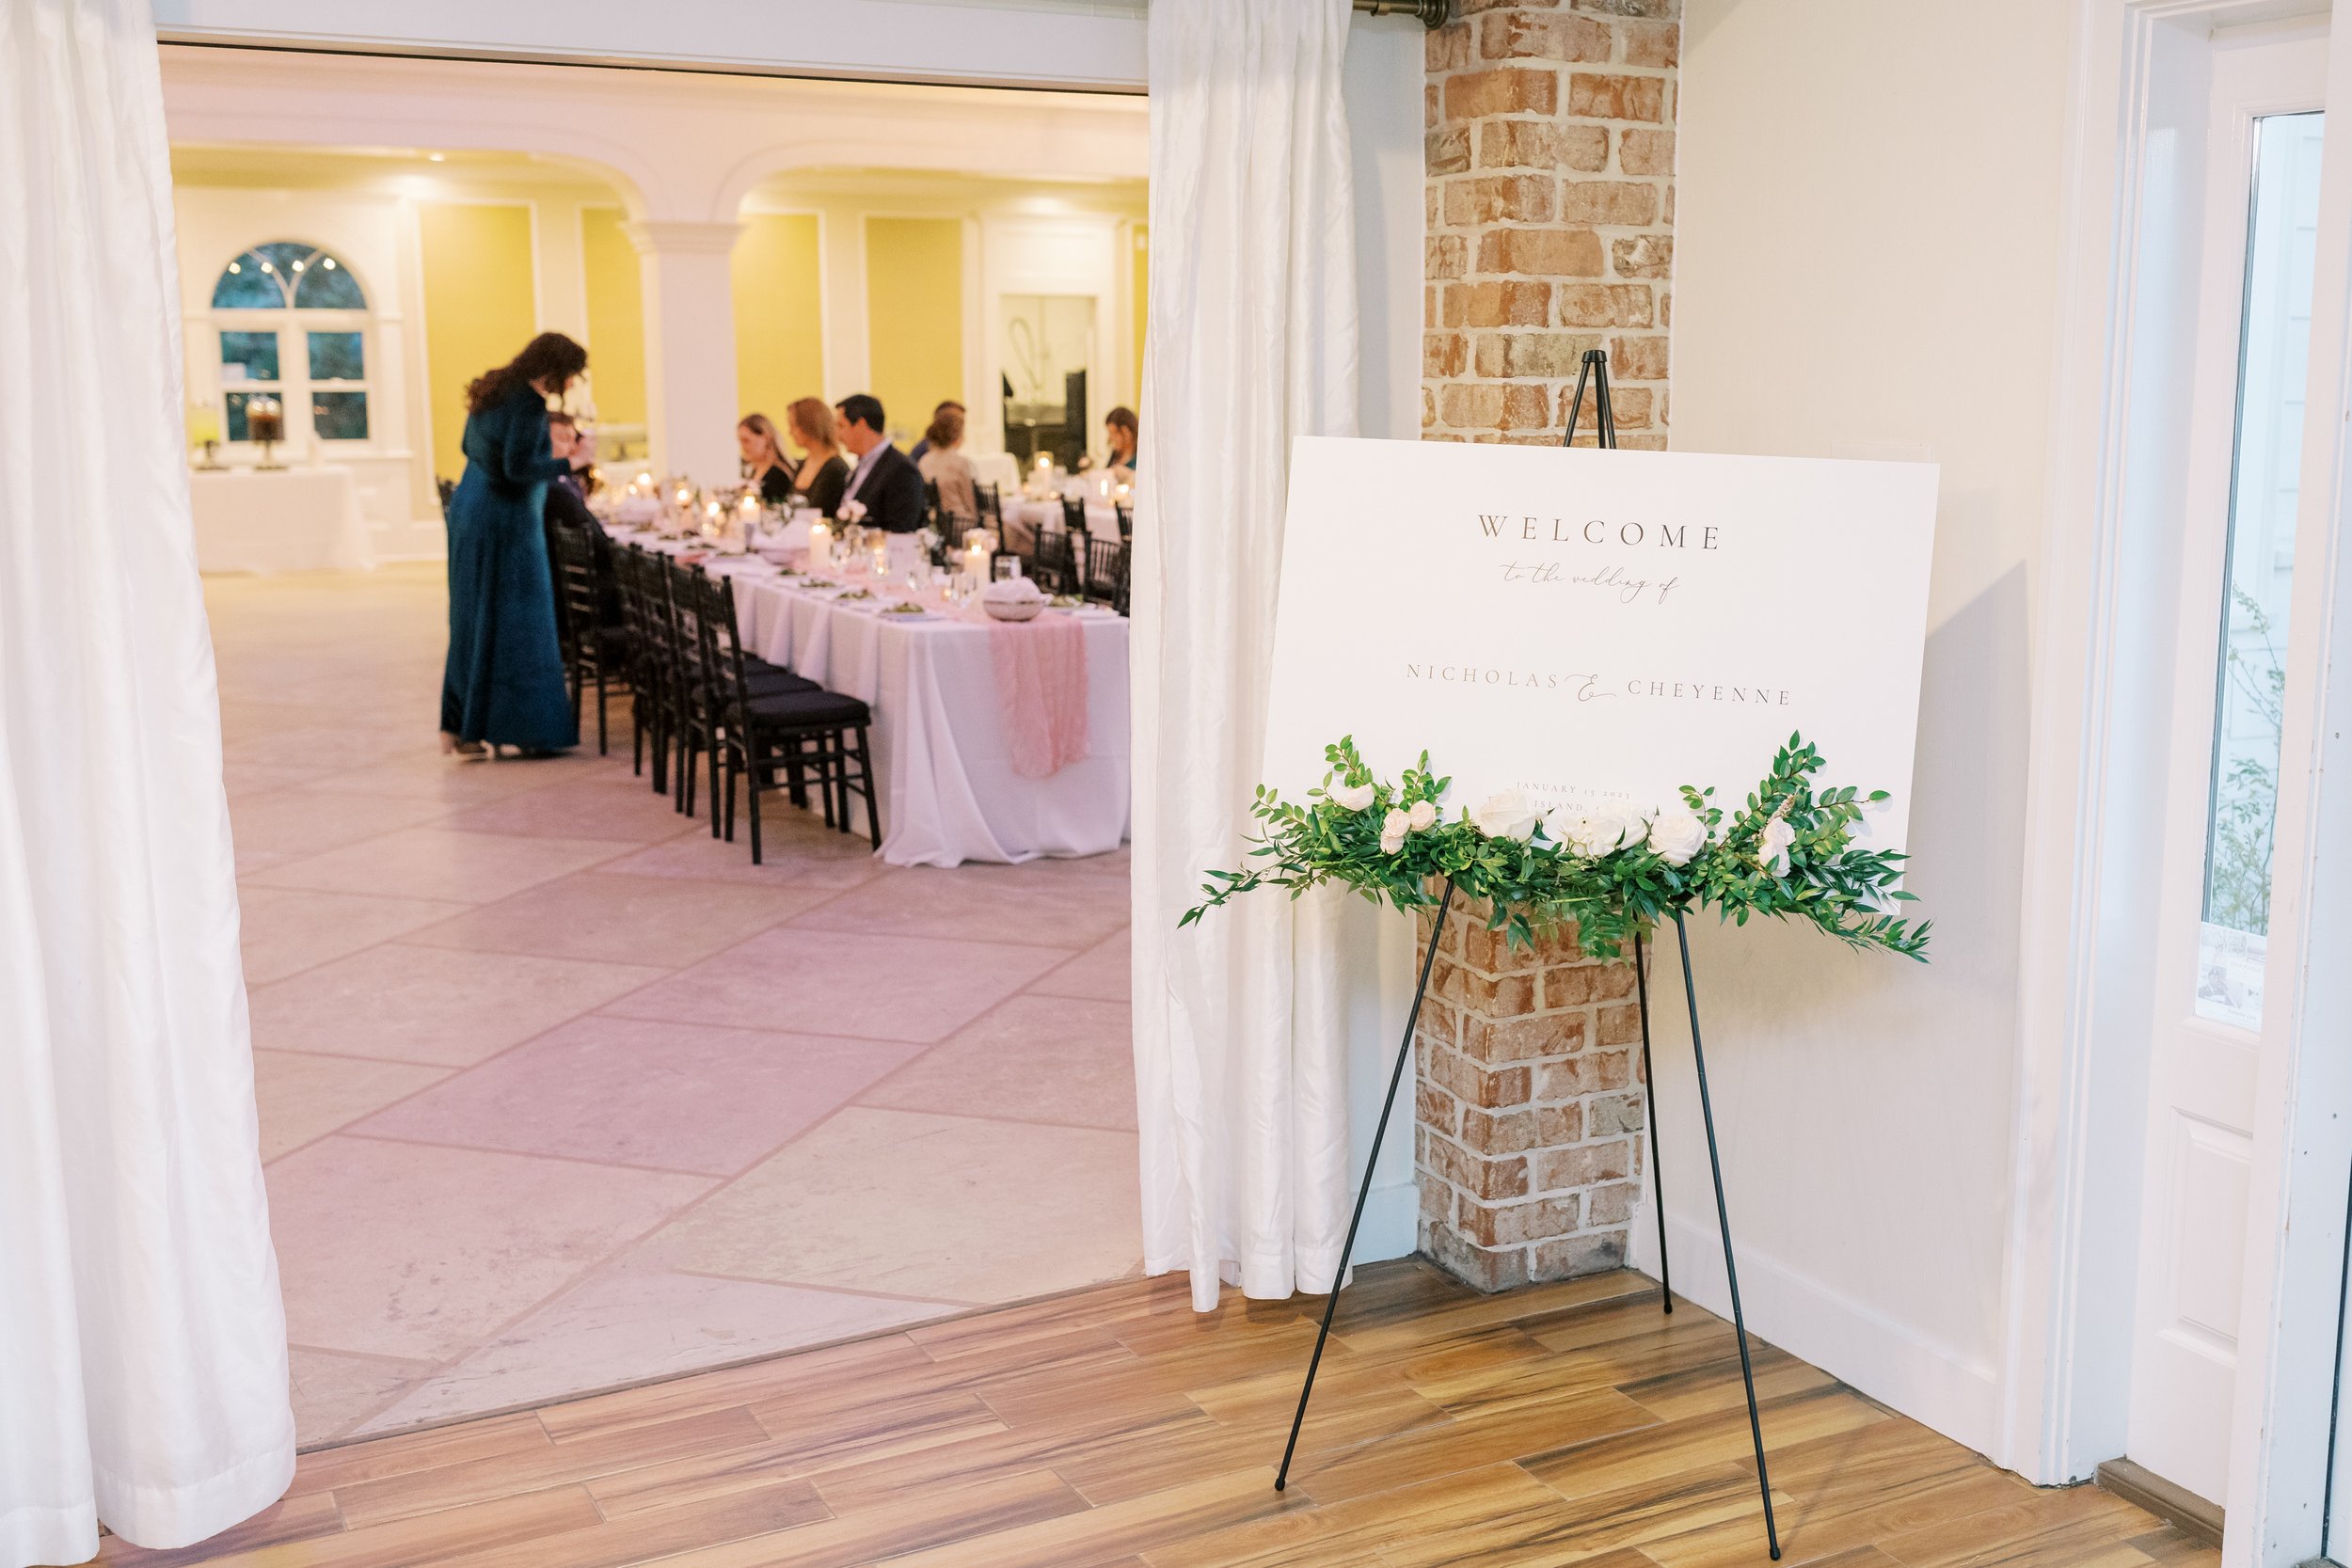 cheyenne-and-nicks-wedding-at-the-tybee-island-wedding-chapel-planned-by-savannah-wedding-planner-ivory-and-beau-with-sottero-and-midgley-gown-from-savannah-bridal-shop-and-wedding-florals-from-savannah-florist-23.jpg